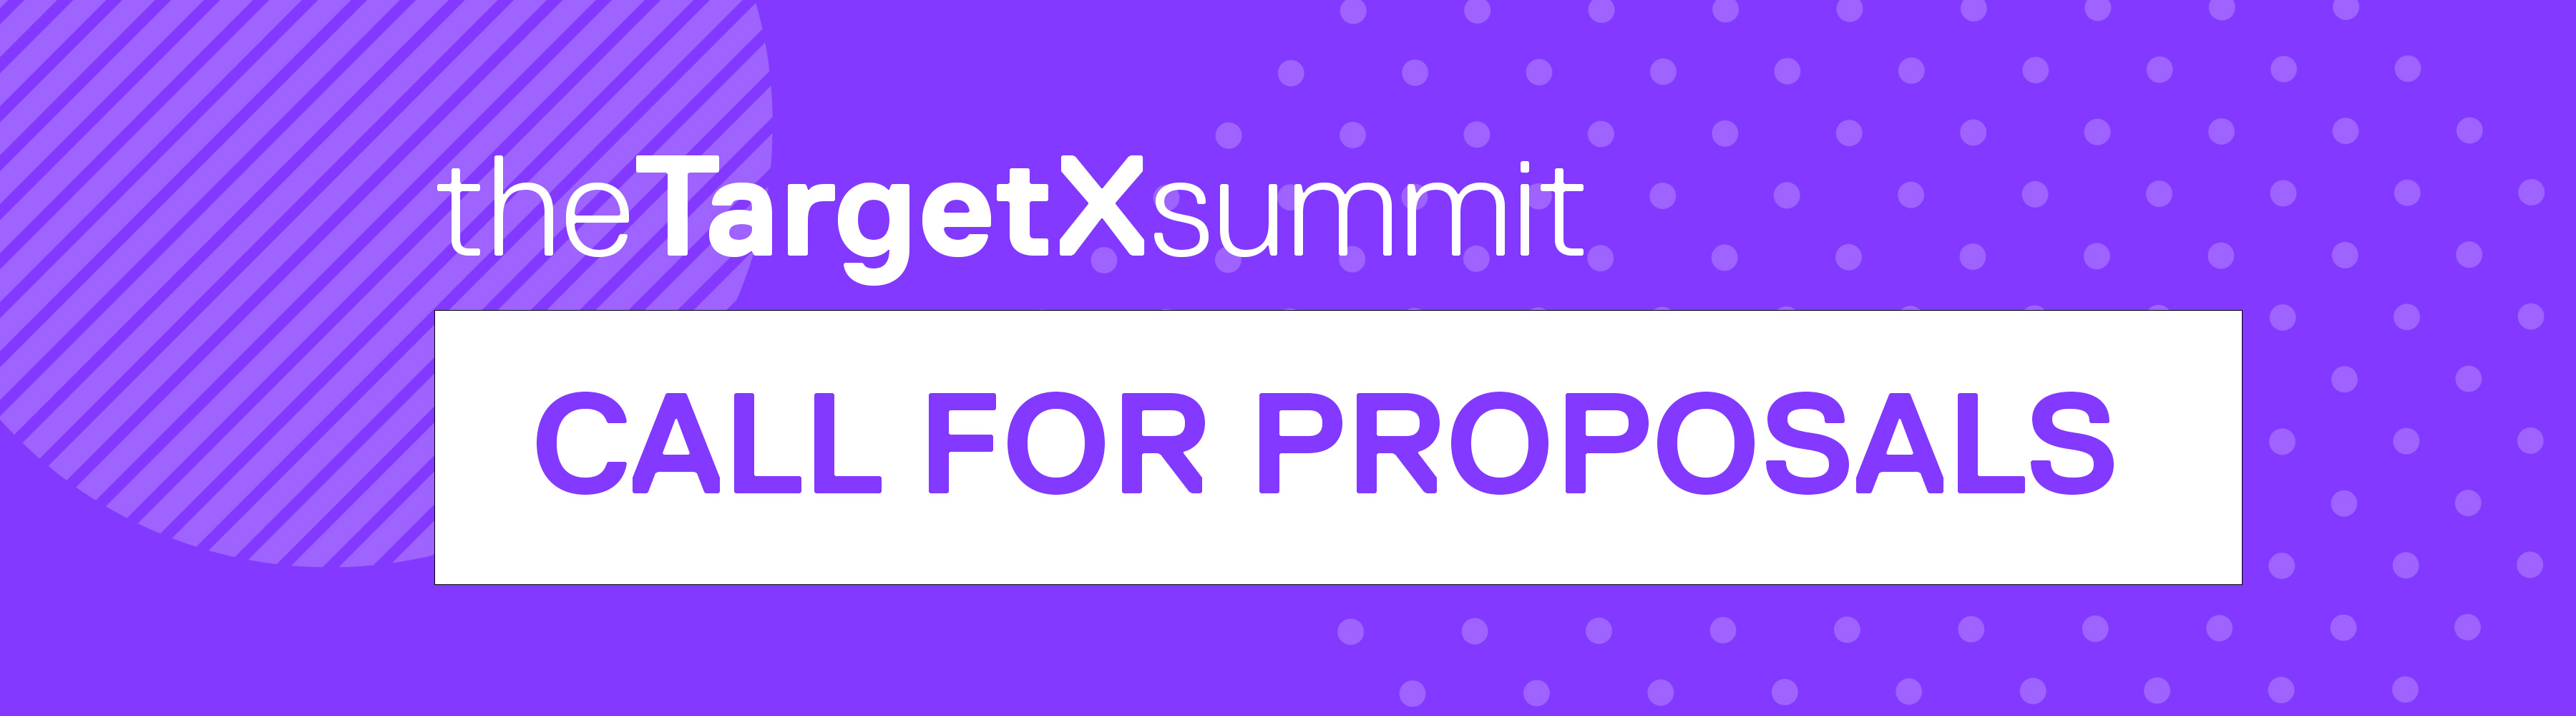 Summit Call for Proposals